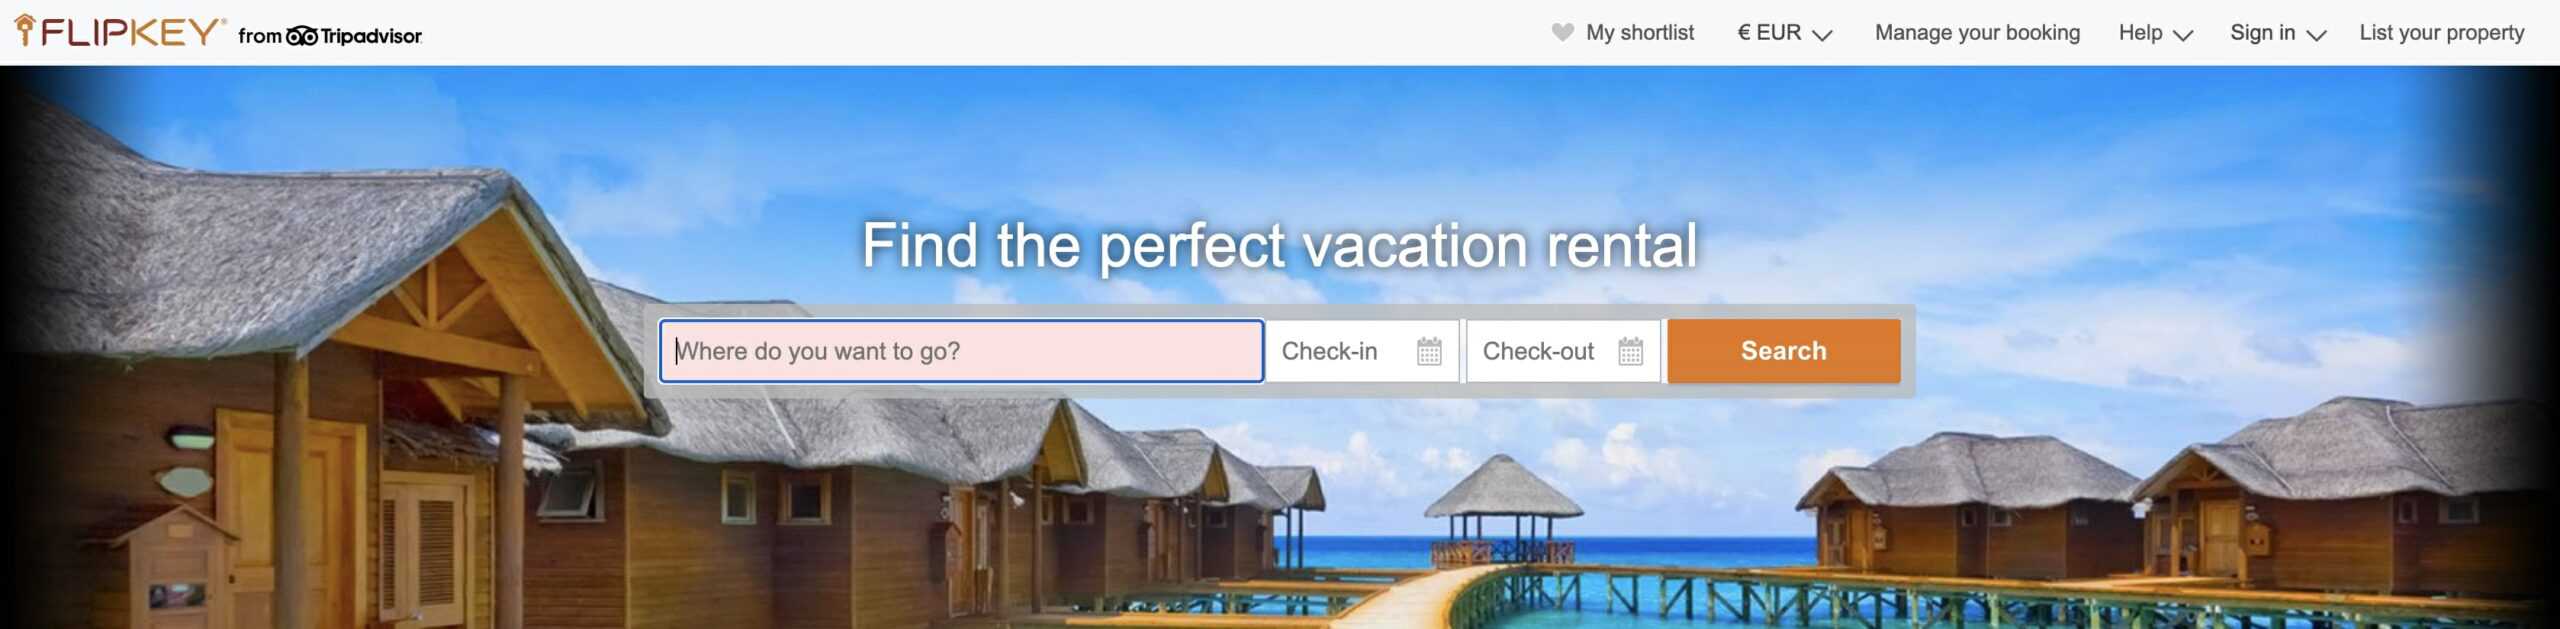 Search bar for vacation rentals on the Flipkey website.